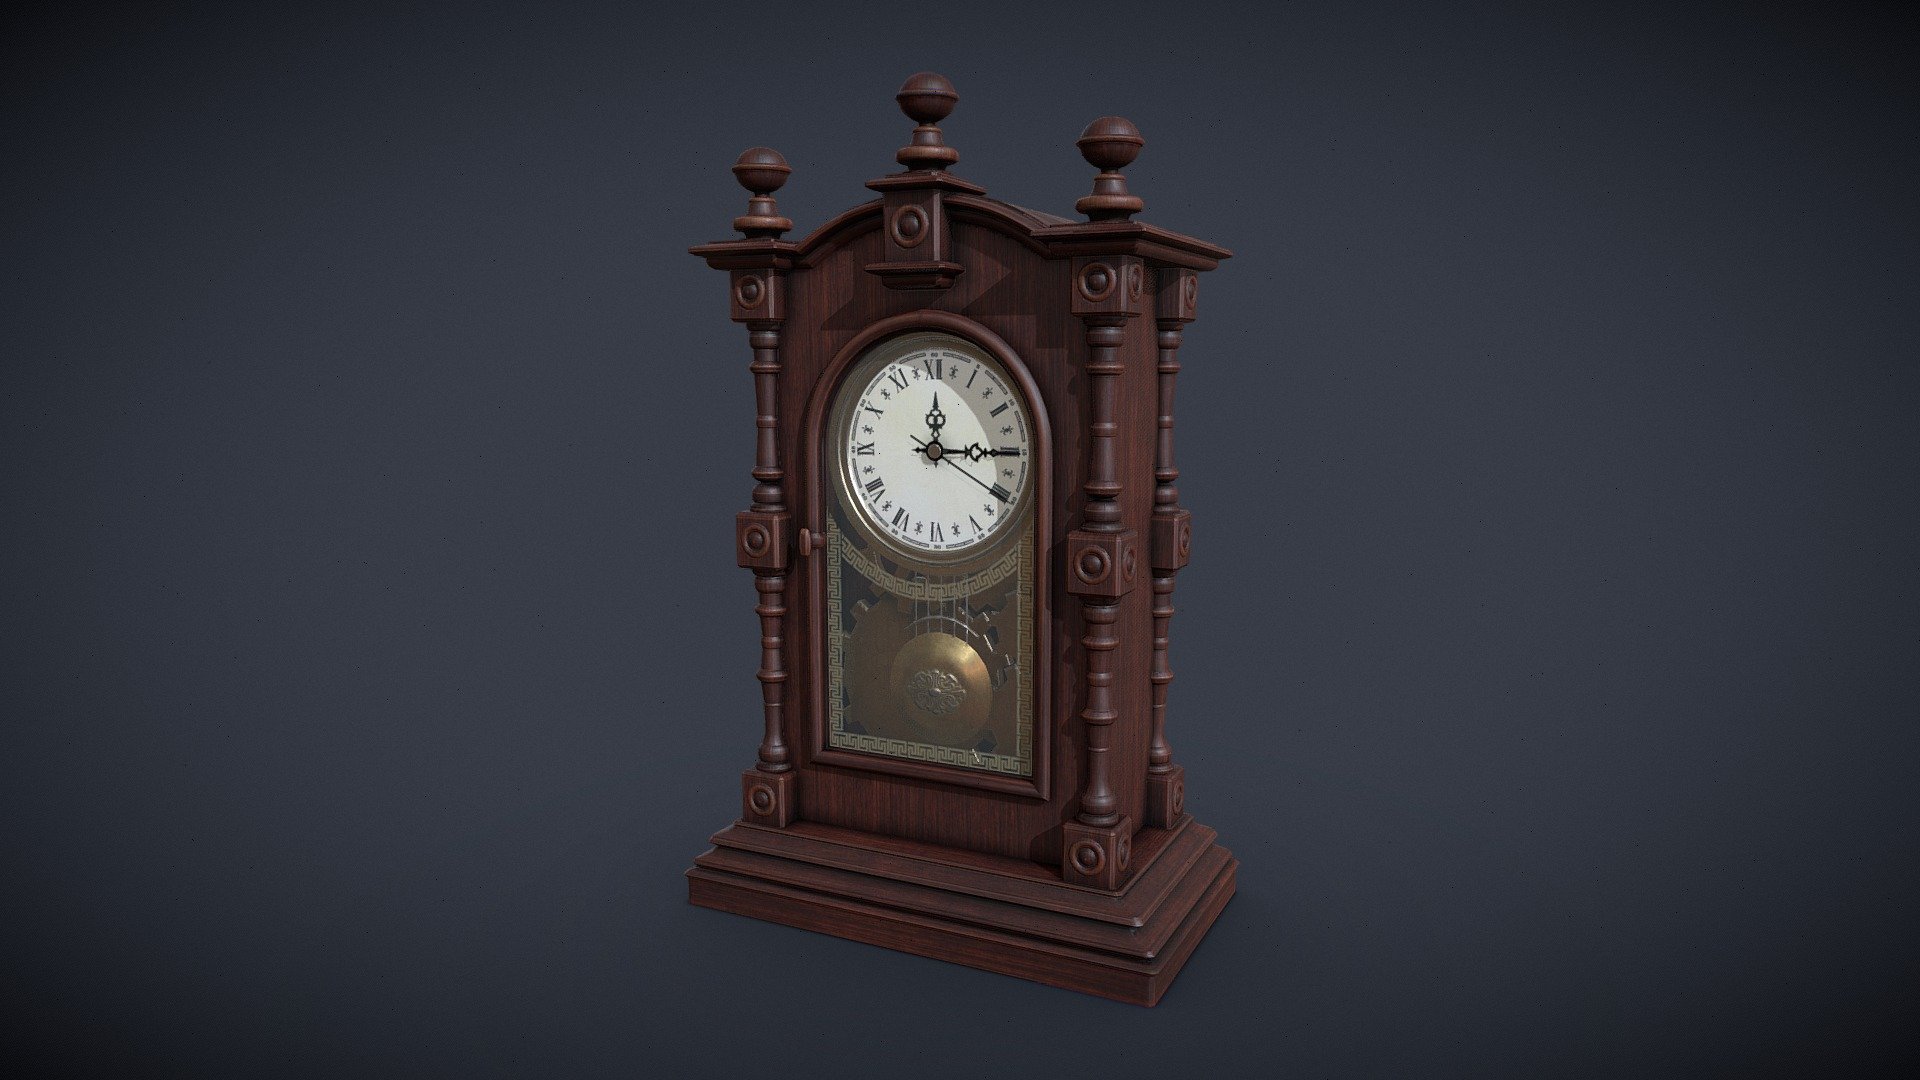 Hello all! This is an asset for a personal project of a victorian scenary. As time is important on my environment design, the rooms may be fill with clocks and time assets :)

Made with Maya, PS and Substance.

You will find in the package Scene file, FBX and 2k Textures.
If you have any customs need, please feel free to contact me 3d model